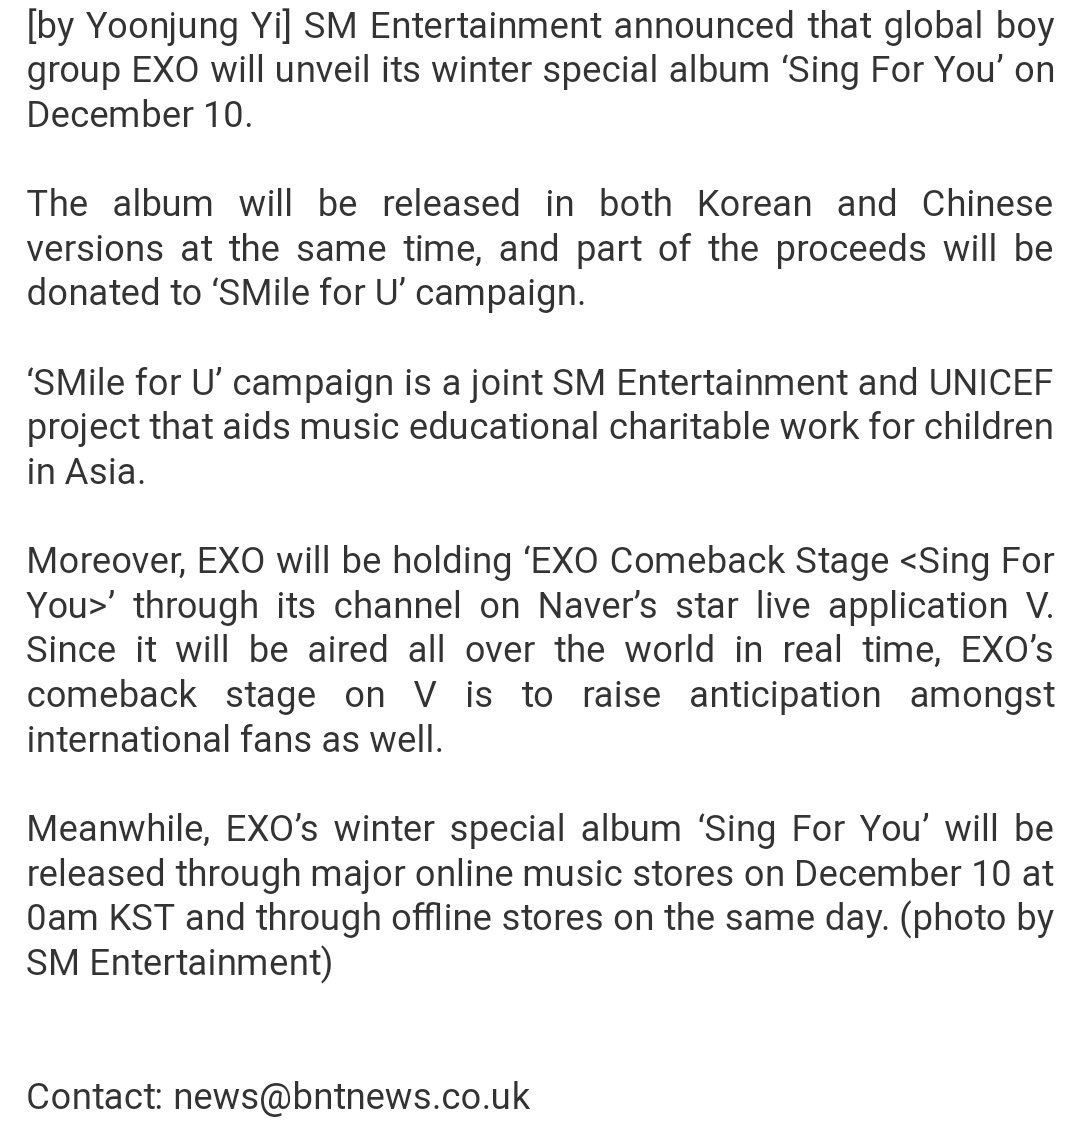 The sales of the EXO’s winter albums have gone to UNICEF’s SMile for U campaign, which supports music education for children in Asia.